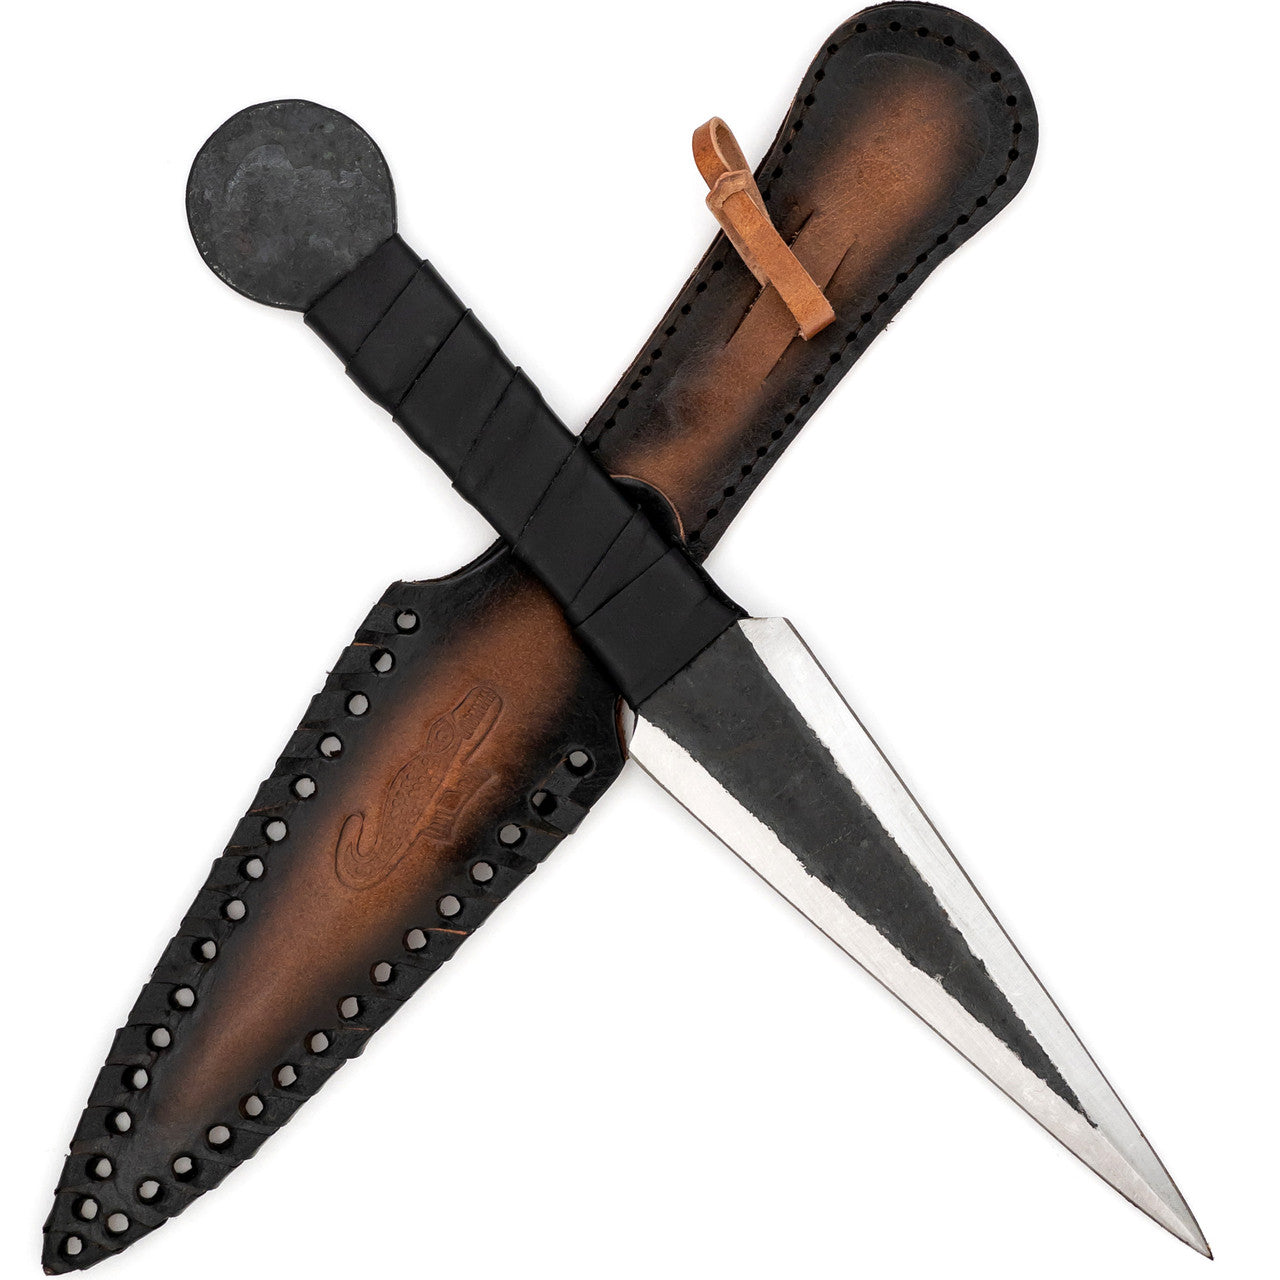 Soaring Heights Forged Carbon Steel Medieval Viking Style Throwing Dagger Knife-0